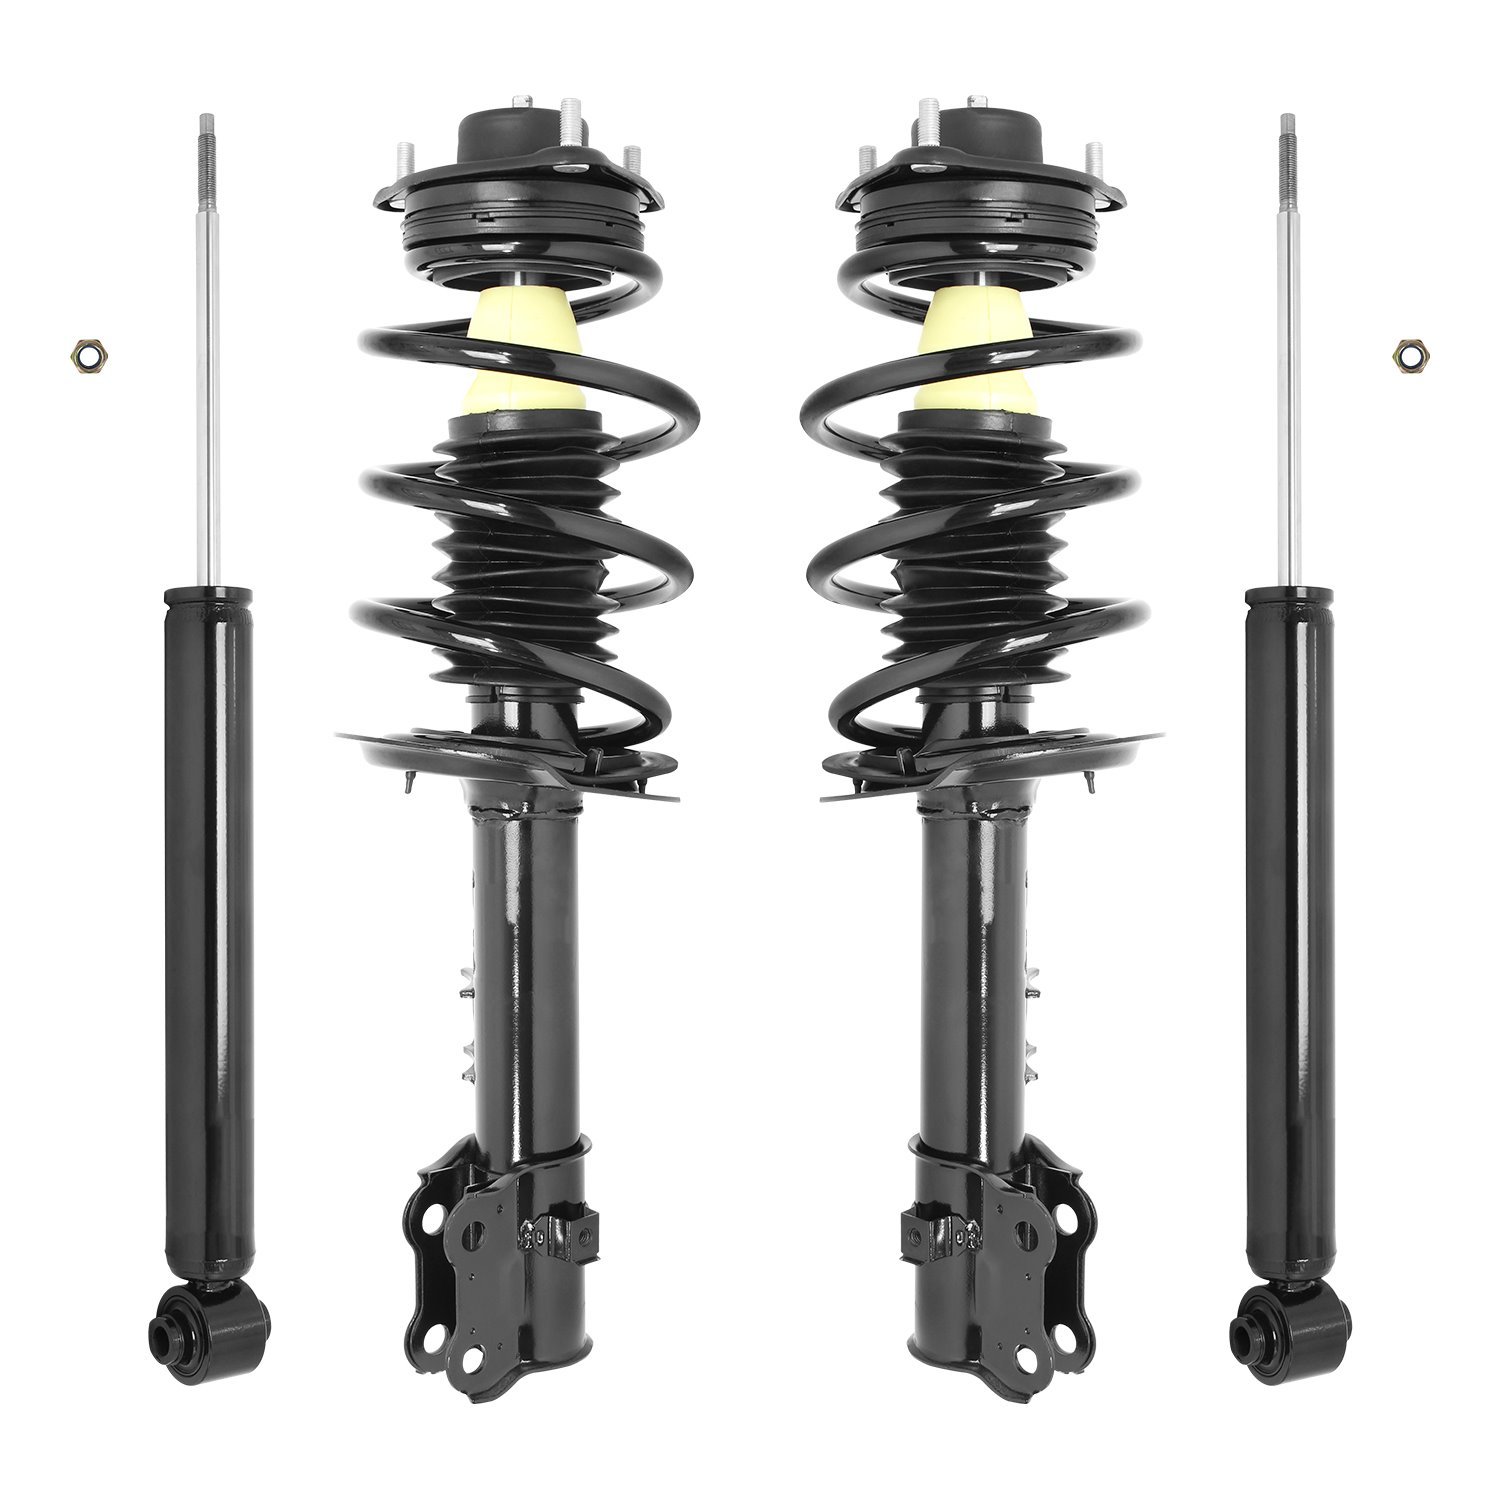 4-11745-259910-001 Front & Rear Suspension Strut & Coil Spring Assembly Fits Select Kia Sportage, Hyundai Tucson